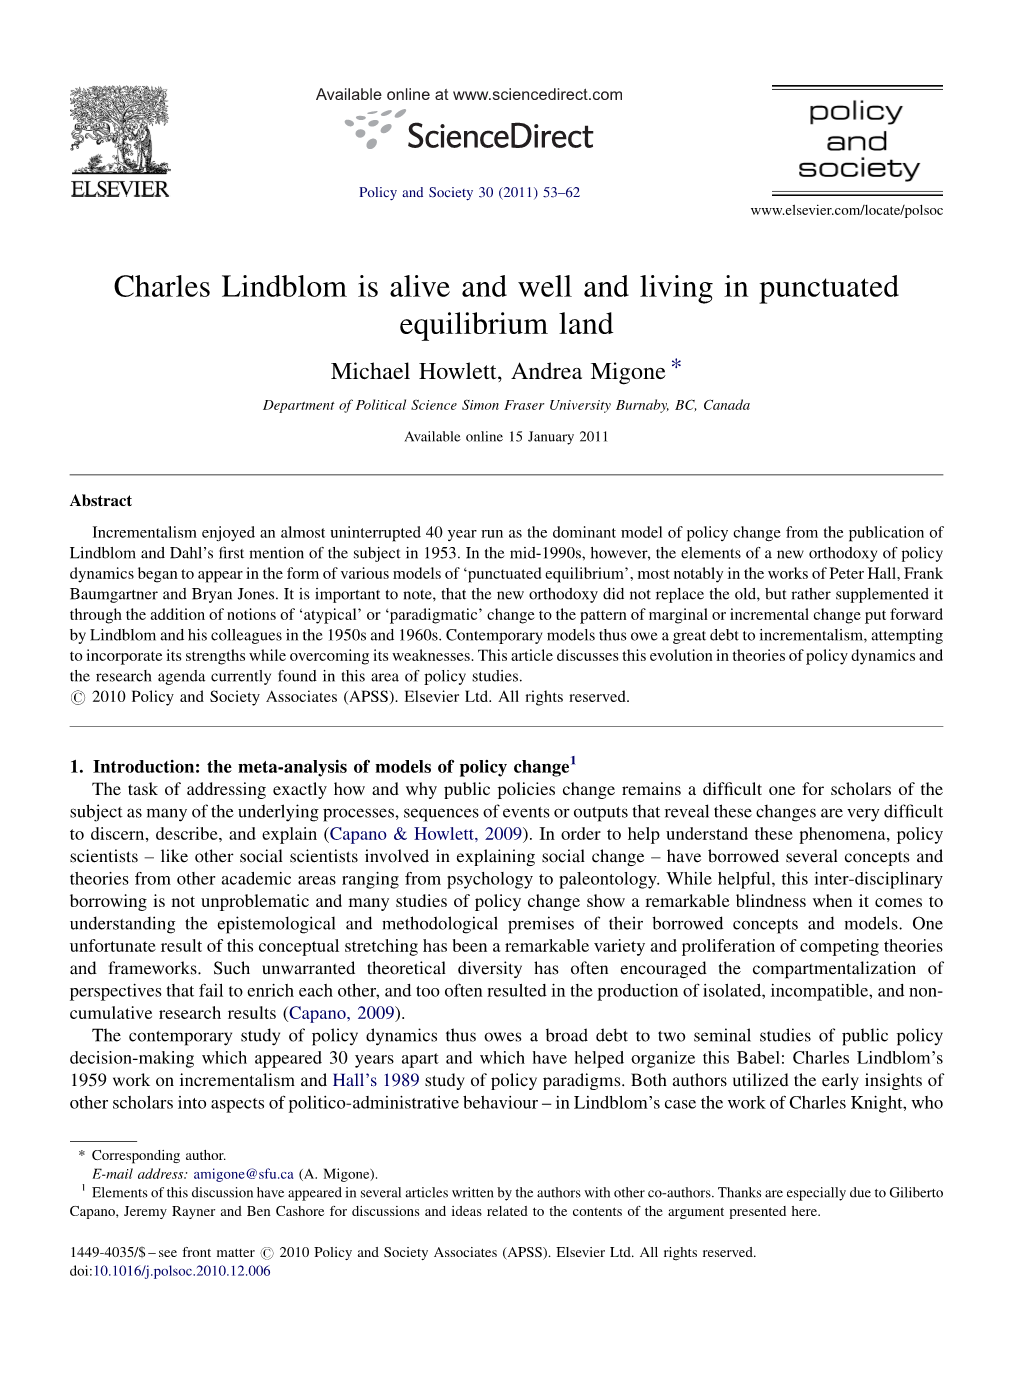 Charles Lindblom Is Alive and Well and Living in Punctuated Equilibrium Land